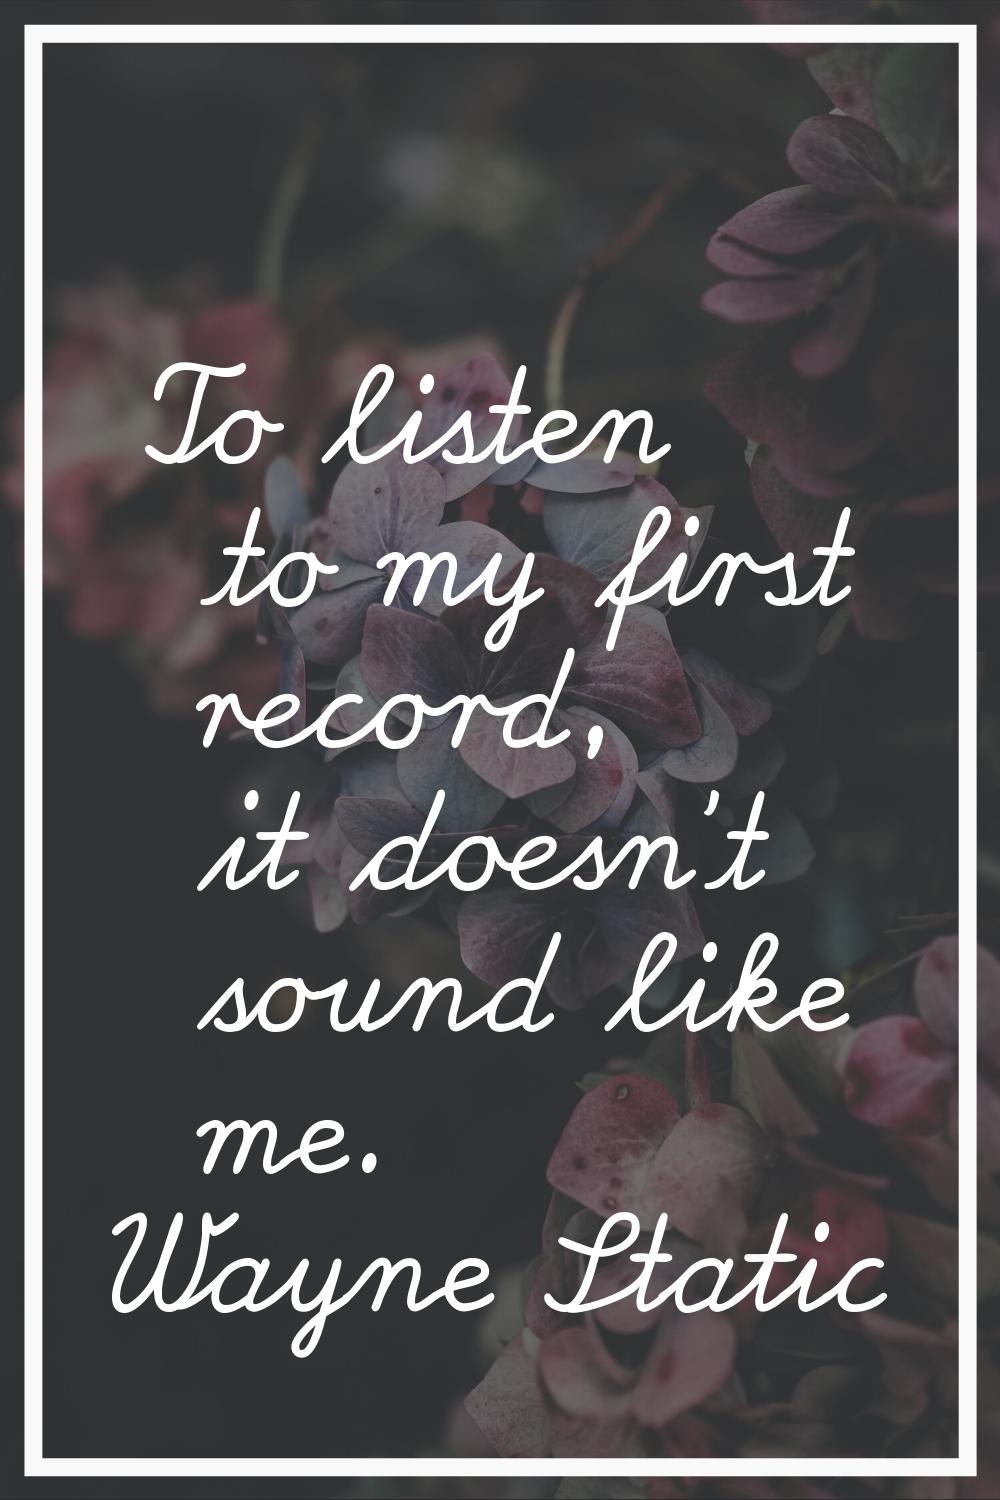 To listen to my first record, it doesn't sound like me.